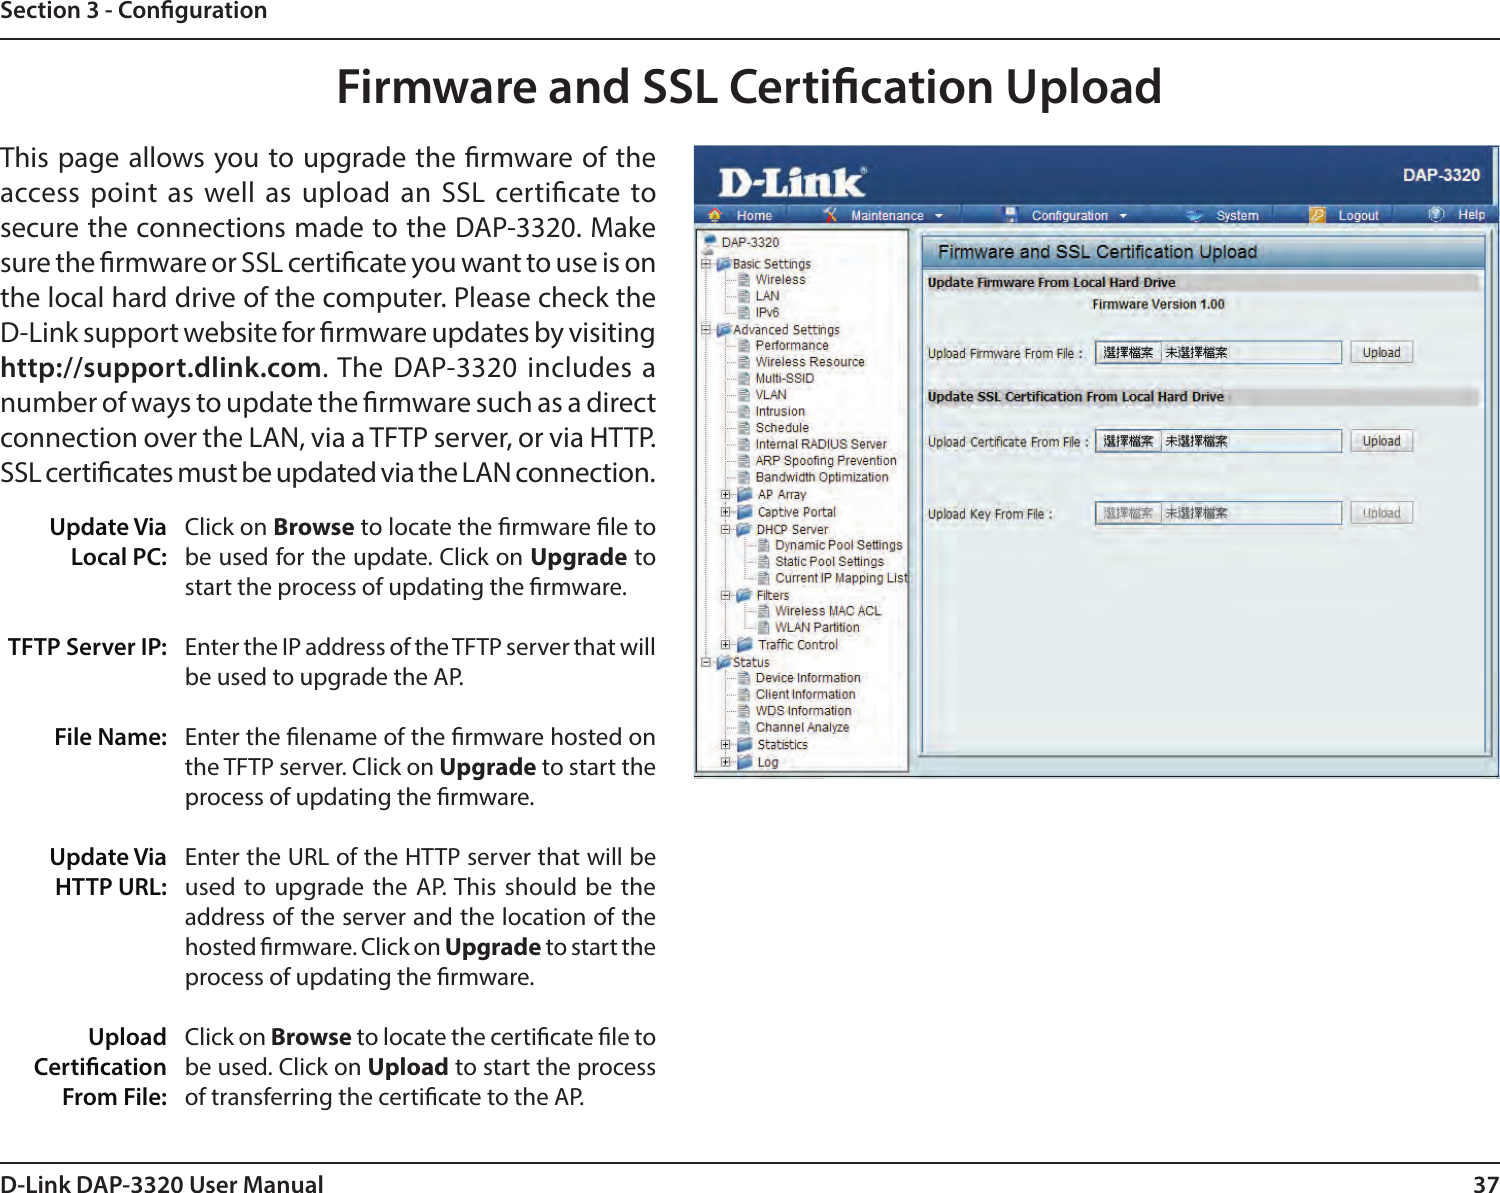 37D-Link DAP-3320 User ManualSection 3 - CongurationFirmware and SSL Certication UploadUpdate Via Local PC:TFTP Server IP:File Name:Update Via HTTP URL:Upload Certication From File:Click on Browse to locate the rmware le to be used for the update. Click on Upgrade to start the process of updating the rmware.Enter the IP address of the TFTP server that will be used to upgrade the AP.Enter the lename of the rmware hosted on the TFTP server. Click on Upgrade to start the process of updating the rmware.Enter the URL of the HTTP server that will be used to upgrade the AP. This should be the address of the server and the location of the hosted rmware. Click on Upgrade to start the process of updating the rmware.Click on Browse to locate the certicate le to be used. Click on Upload to start the process of transferring the certicate to the AP.This page allows you to upgrade the rmware of the access point as well as upload an SSL certicate to secure the connections made to the DAP-3320. Make sure the rmware or SSL certicate you want to use is on the local hard drive of the computer. Please check the D-Link support website for rmware updates by visiting http://support.dlink.com. The DAP-3320 includes a number of ways to update the rmware such as a direct connection over the LAN, via a TFTP server, or via HTTP.SSL certicates must be updated via the LAN connection.